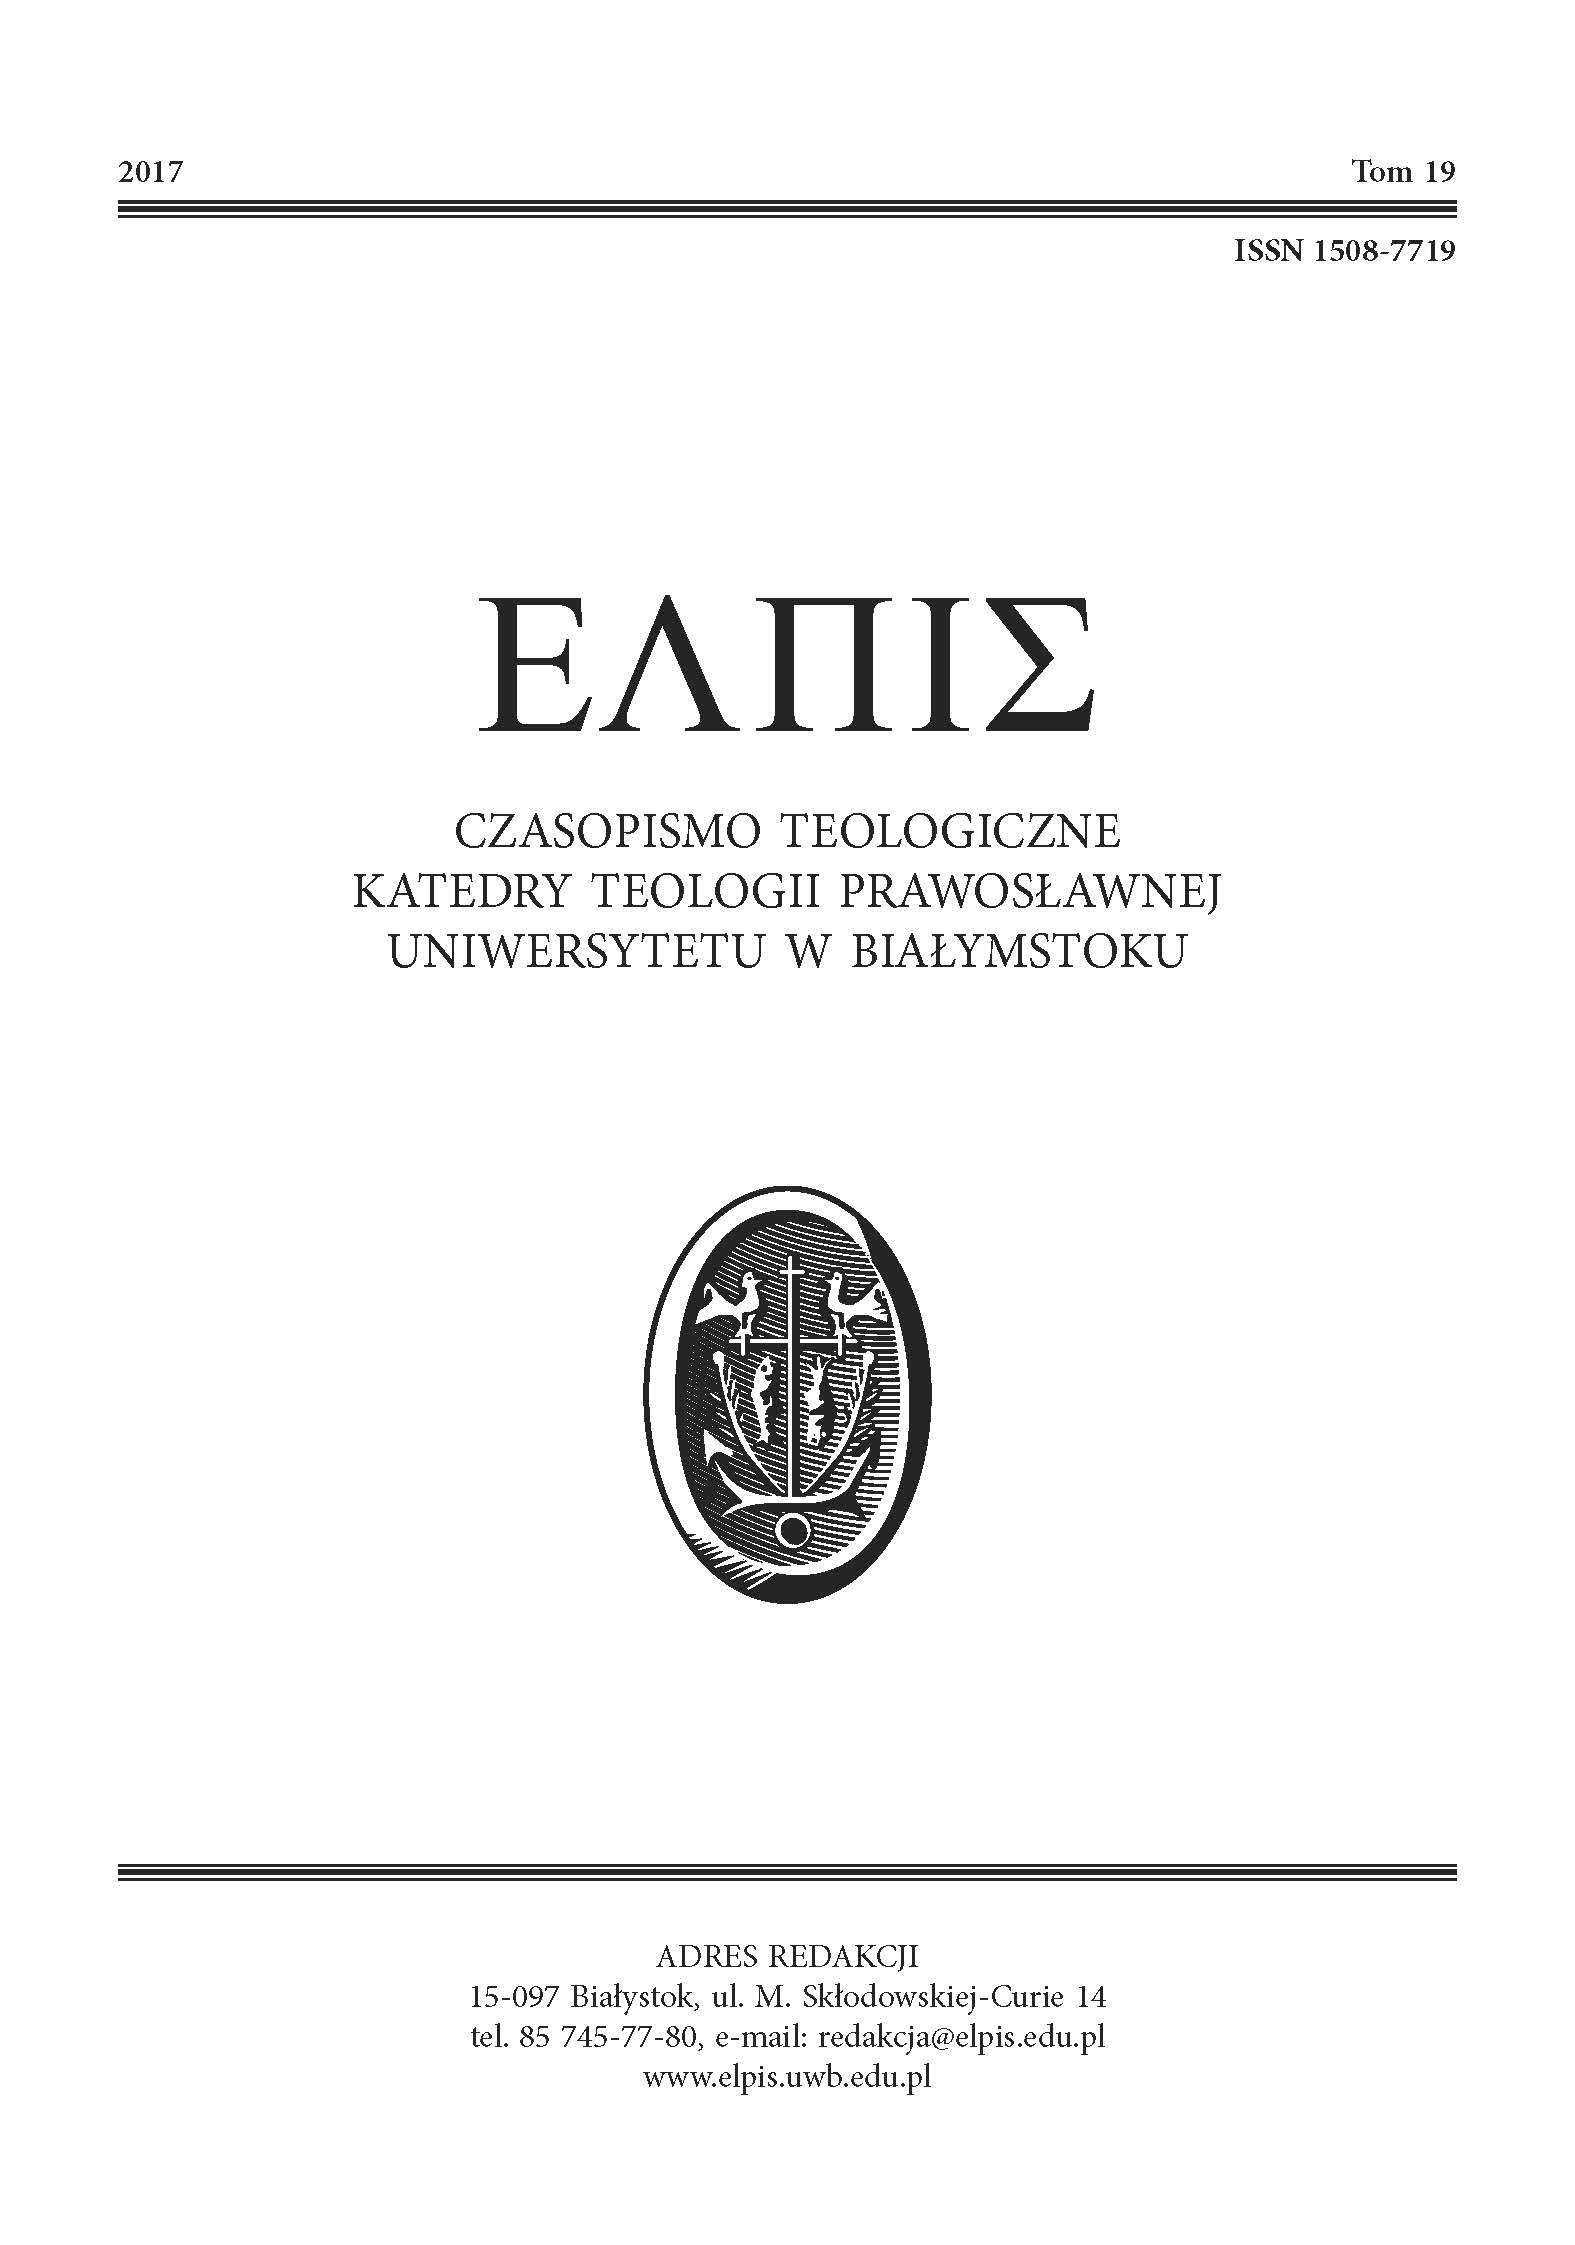 Theological evaluation of economics or Economics through the Orthodox theologist point of view Cover Image